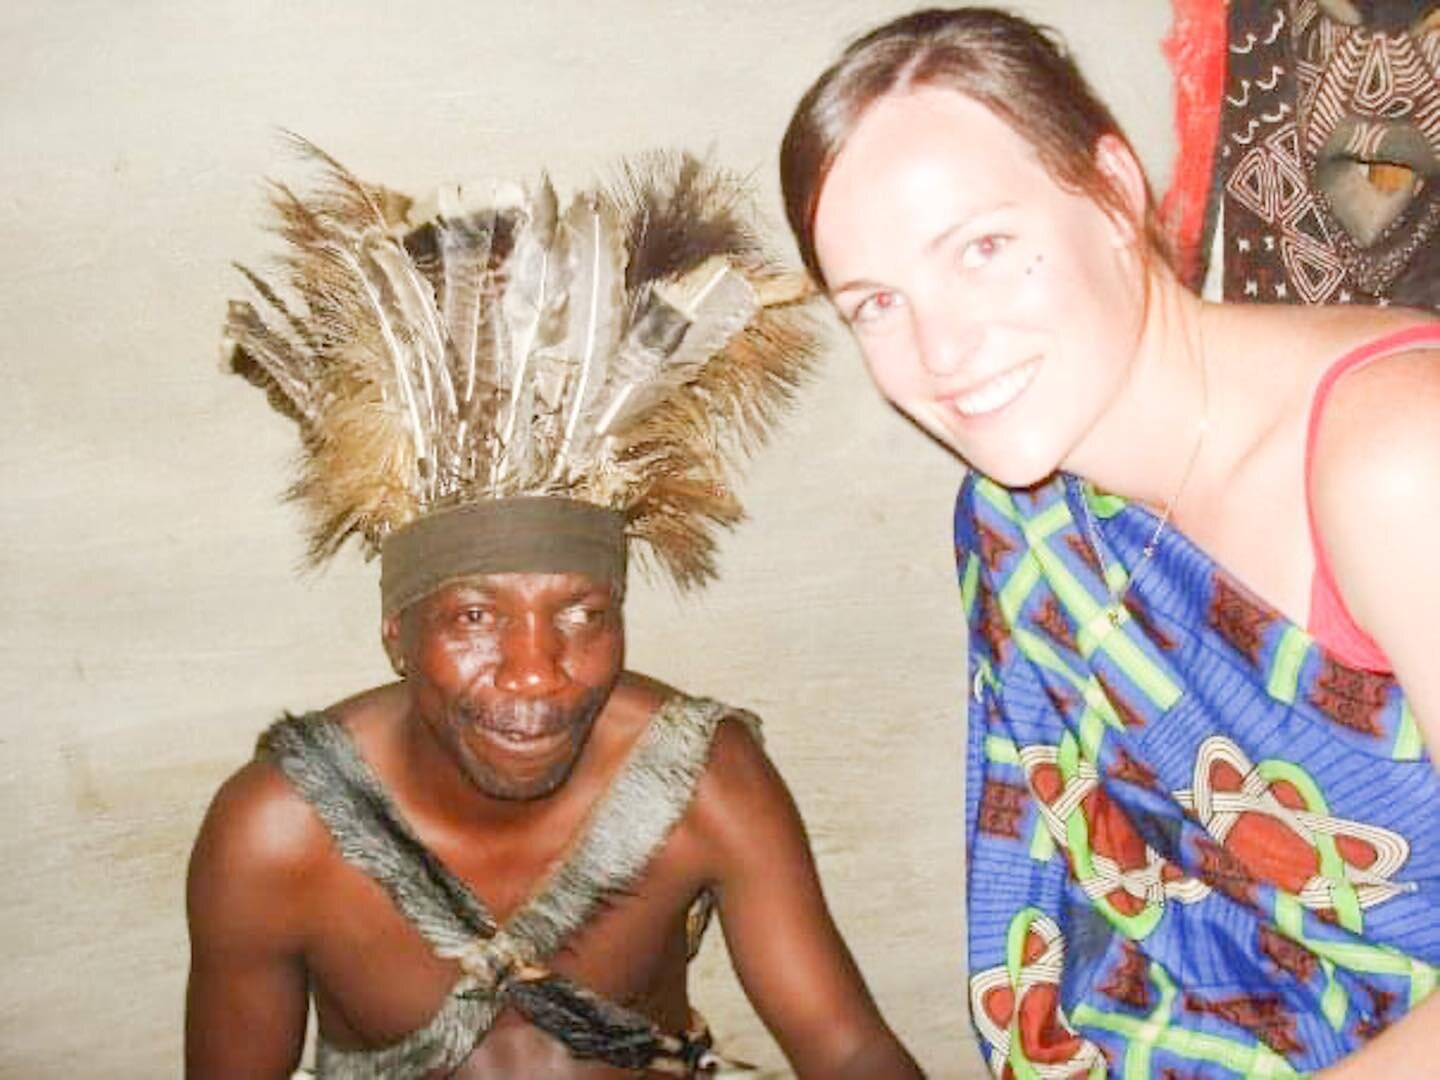 That time I met a witch doctor in Africa! 
It was 2009 &amp; this was in Zimbabwe. Matt &amp; I were out at a restaurant where we did traditional dancing &amp; had our faces painted. We even ate a grub/ worm 🐛 😝 so we could get a certificate to say